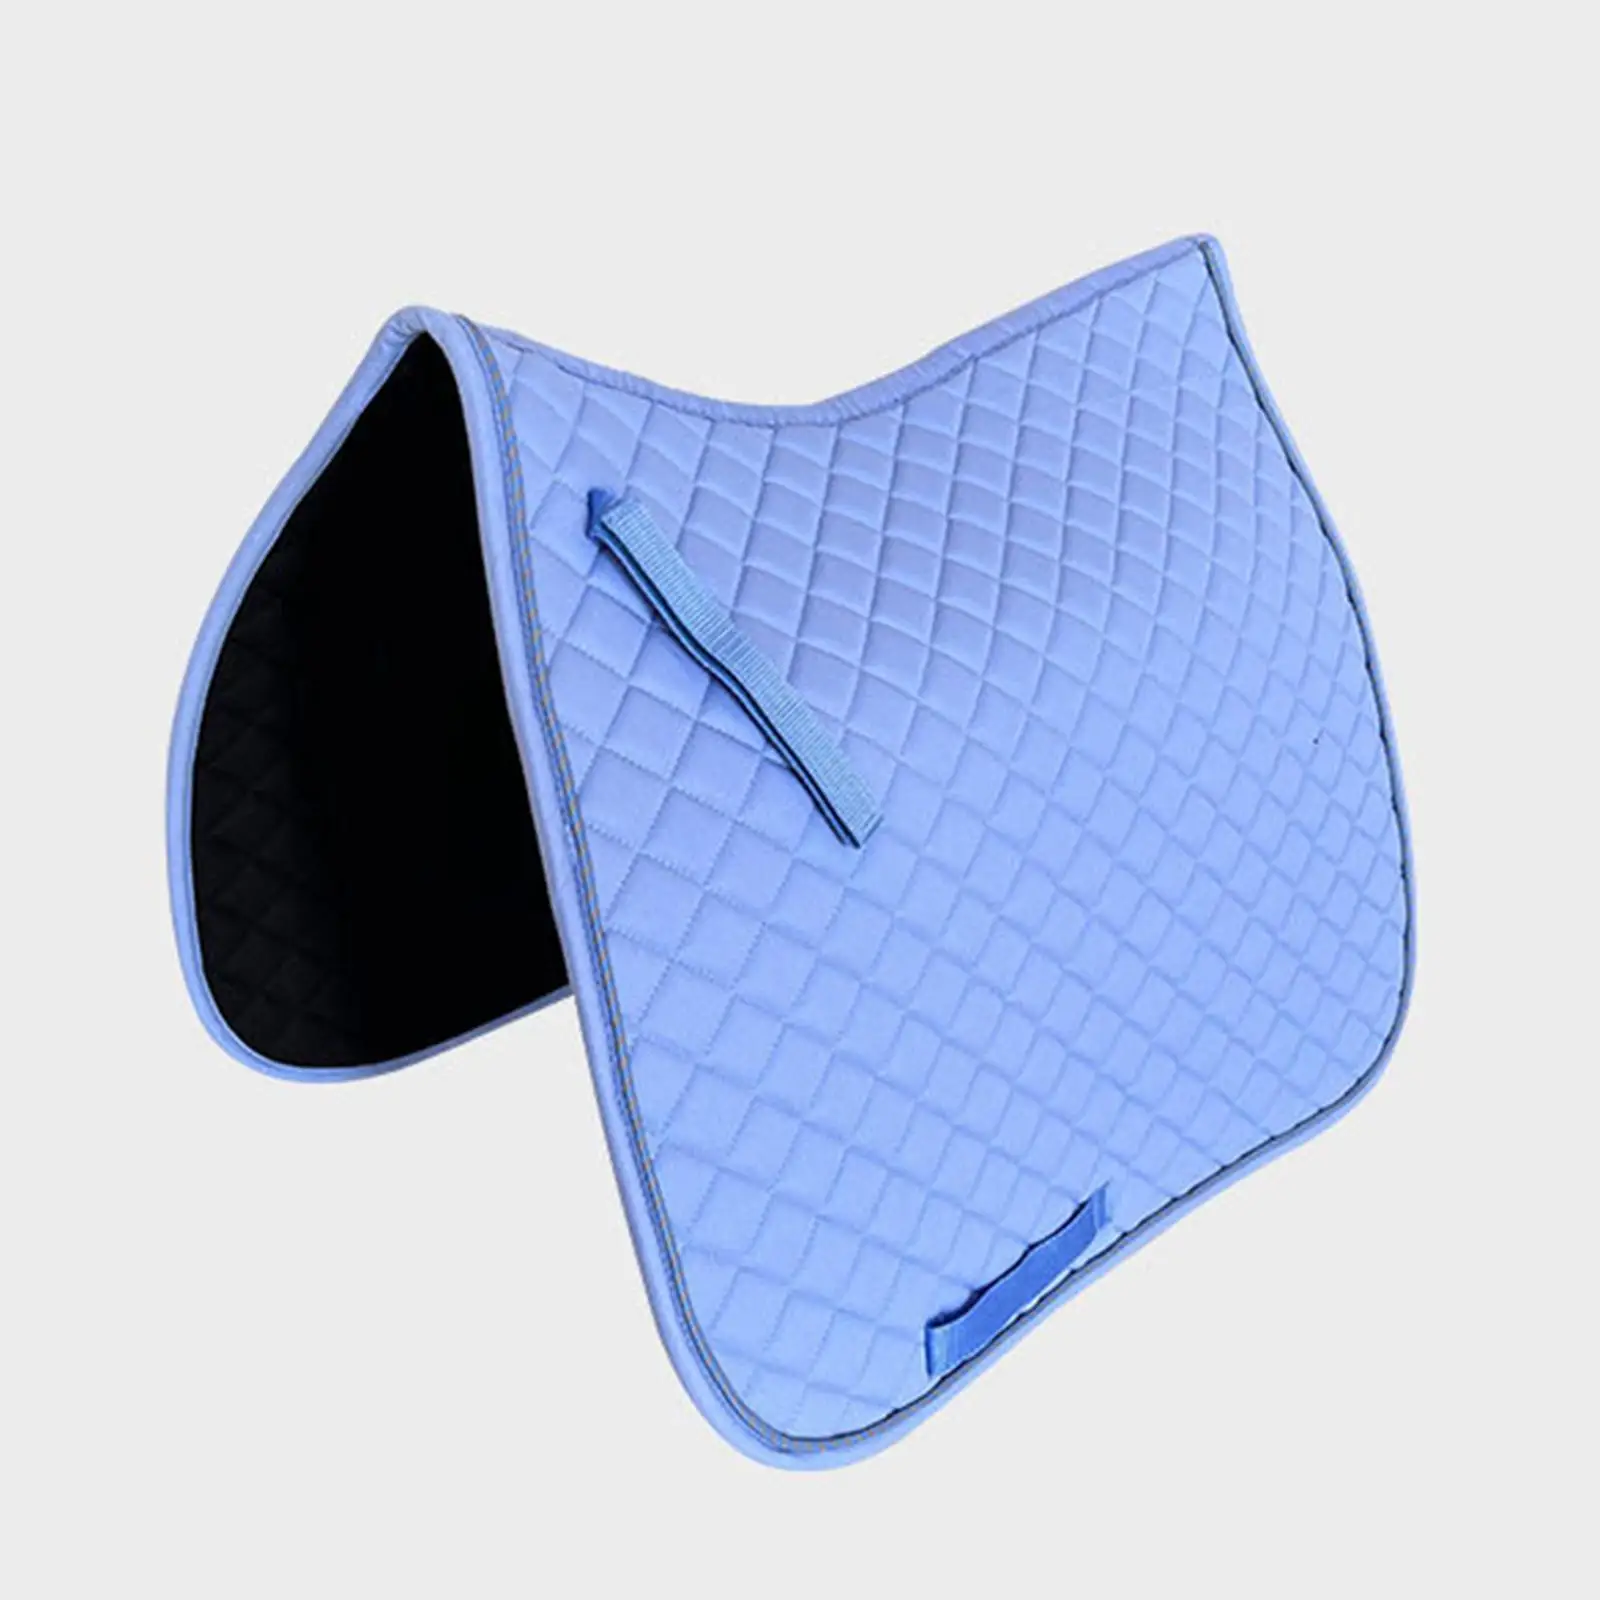 Horse Saddle Seat Pad Portable Non Slip Sports Comfort Protector Equestrian Riding Equipment Lightweight Durable Dressage Pad